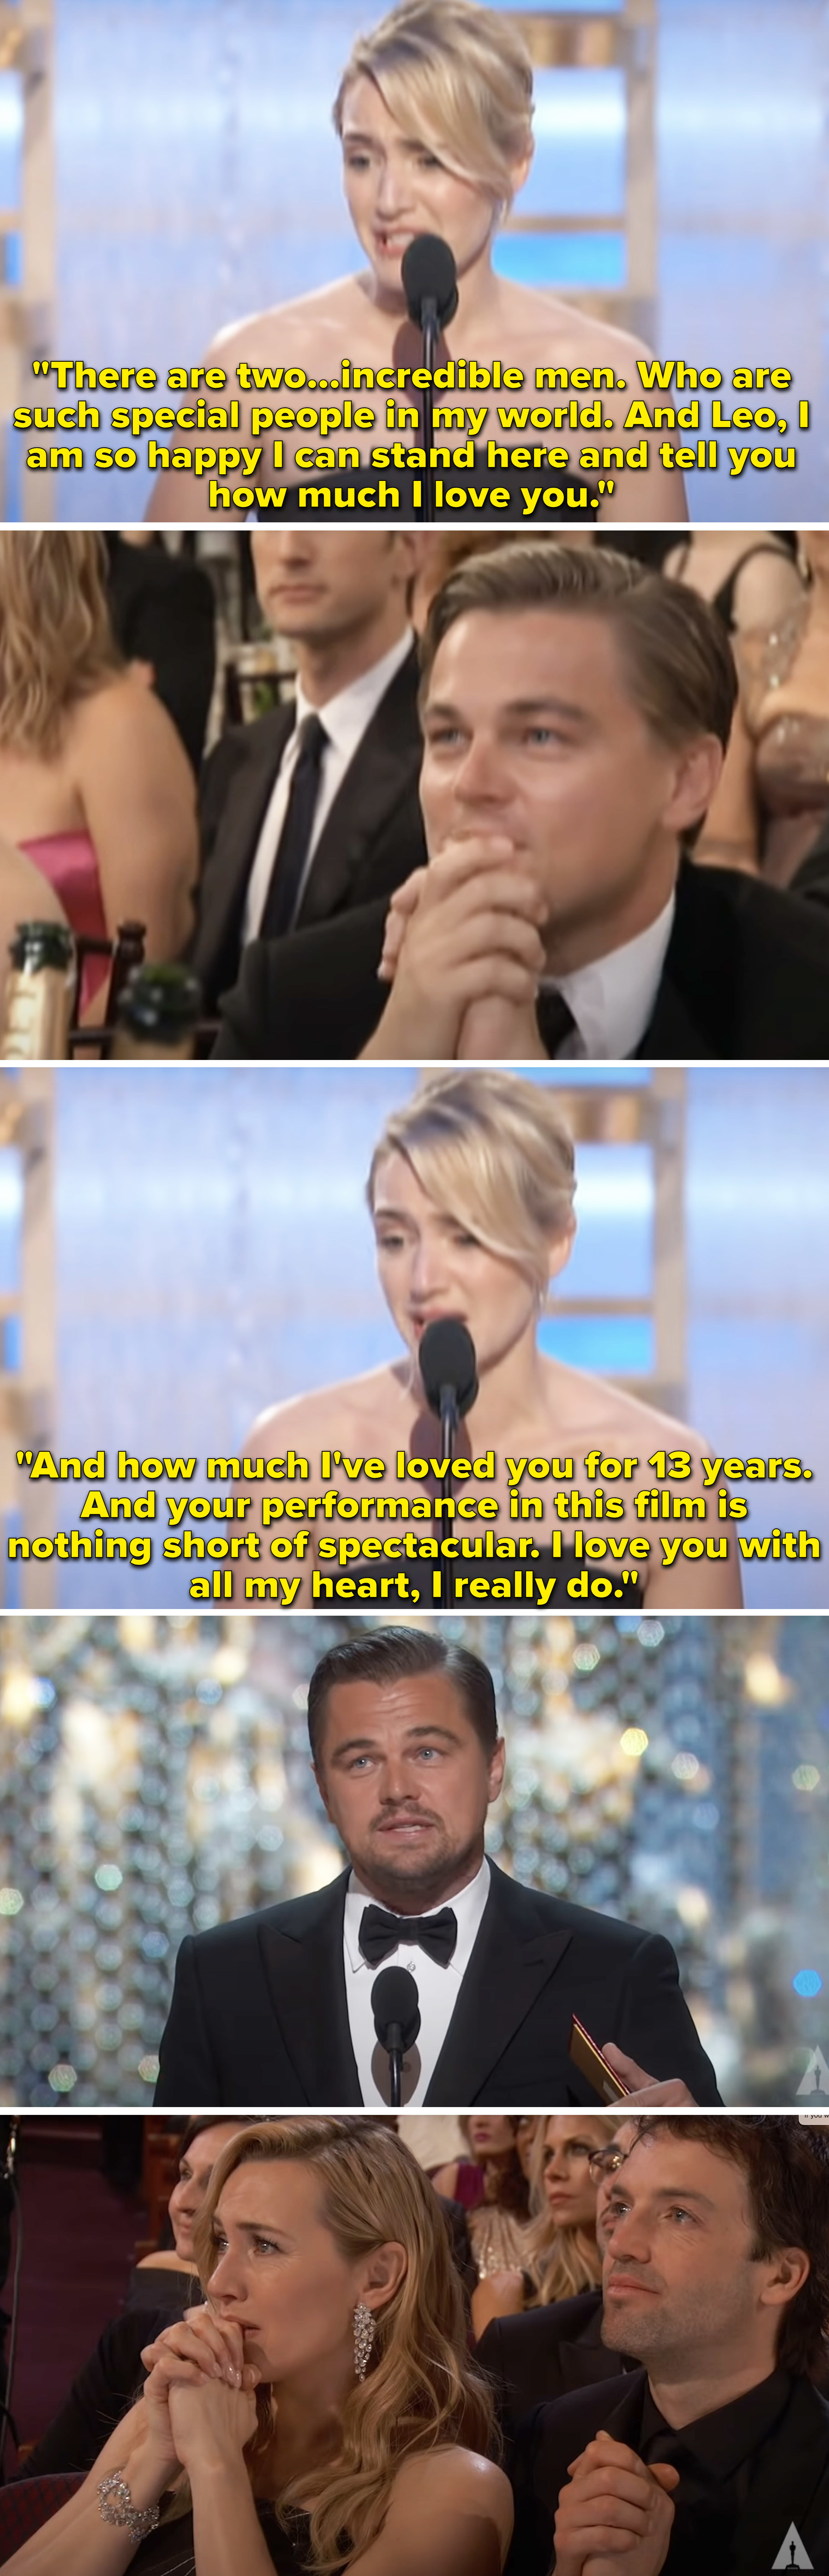 Kate Winslet giving an acceptance speech and Leonardo DiCaprio&#x27;s smiling reaction, and Leonardo DiCaprio&#x27;s acceptance speech and Kate Winslet&#x27;s emotional reaction